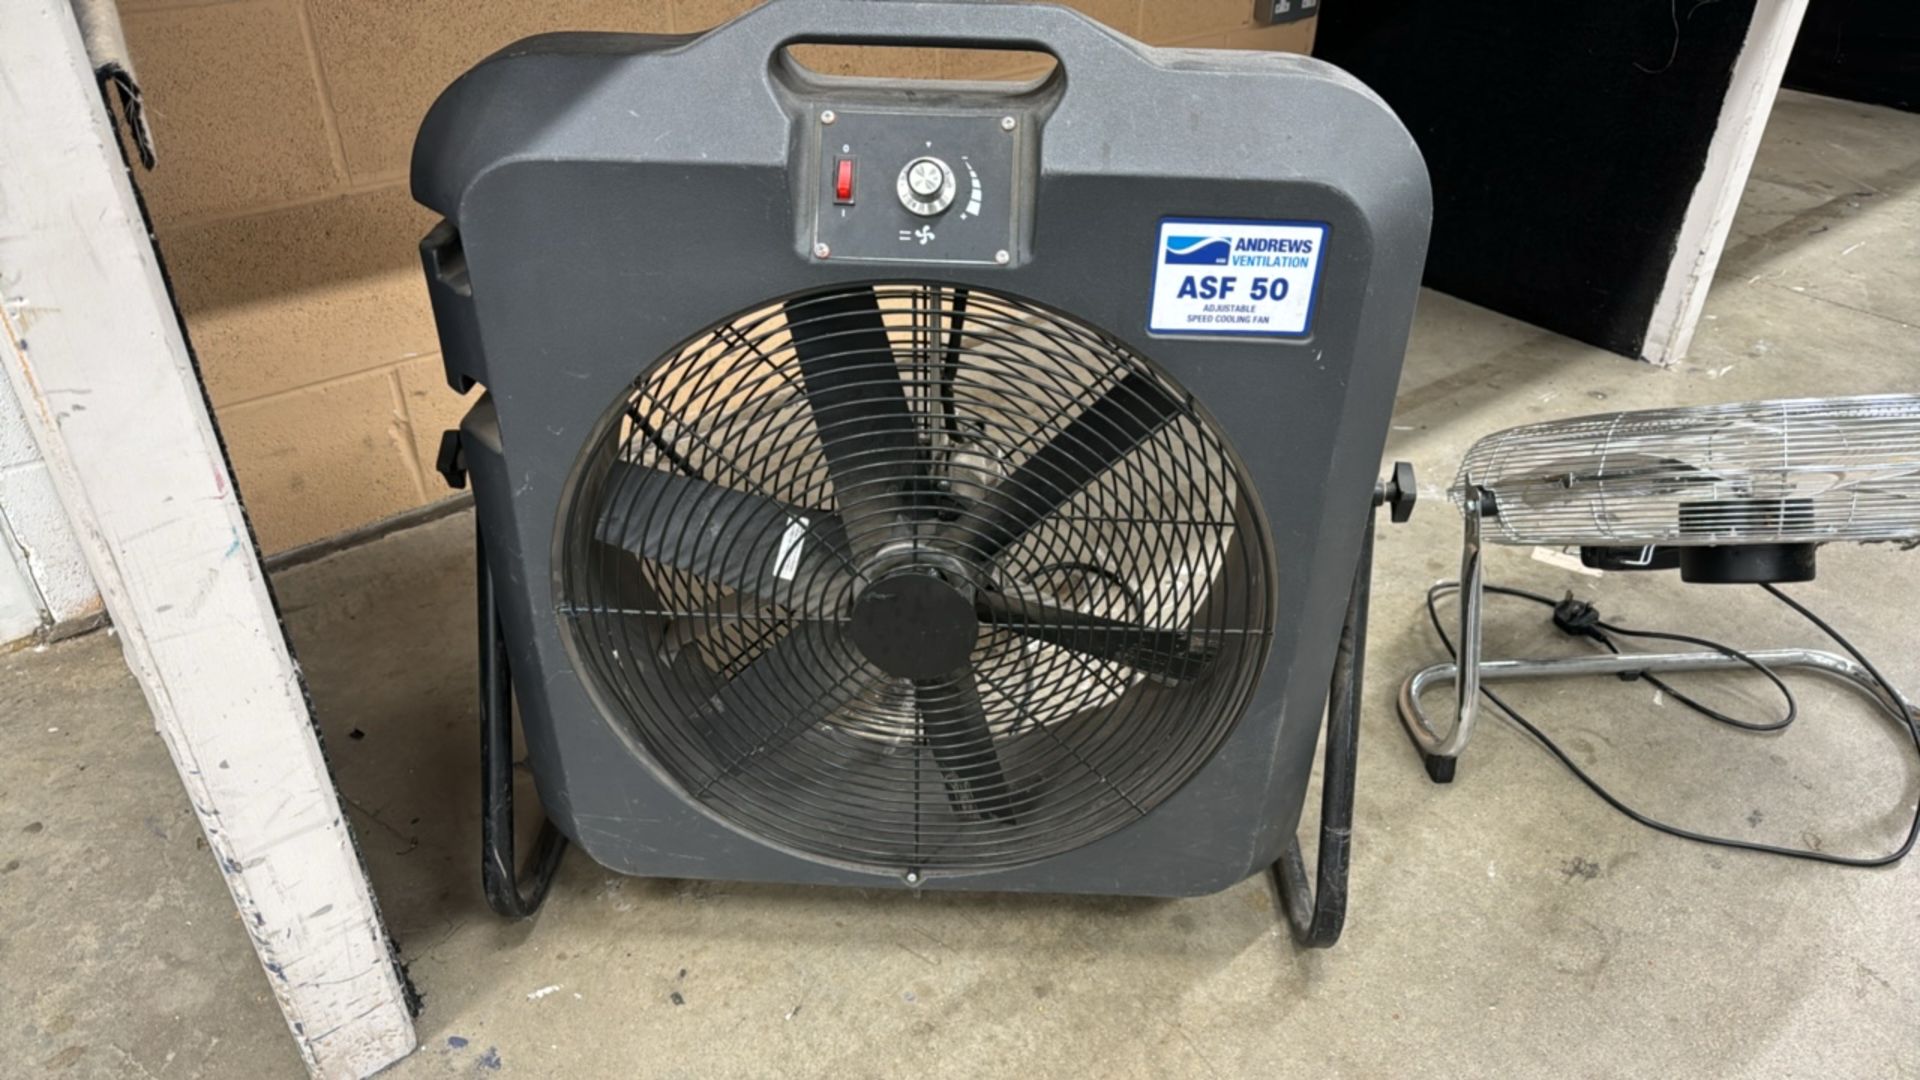 Andrew's Adjustable Speed Cooling Fan